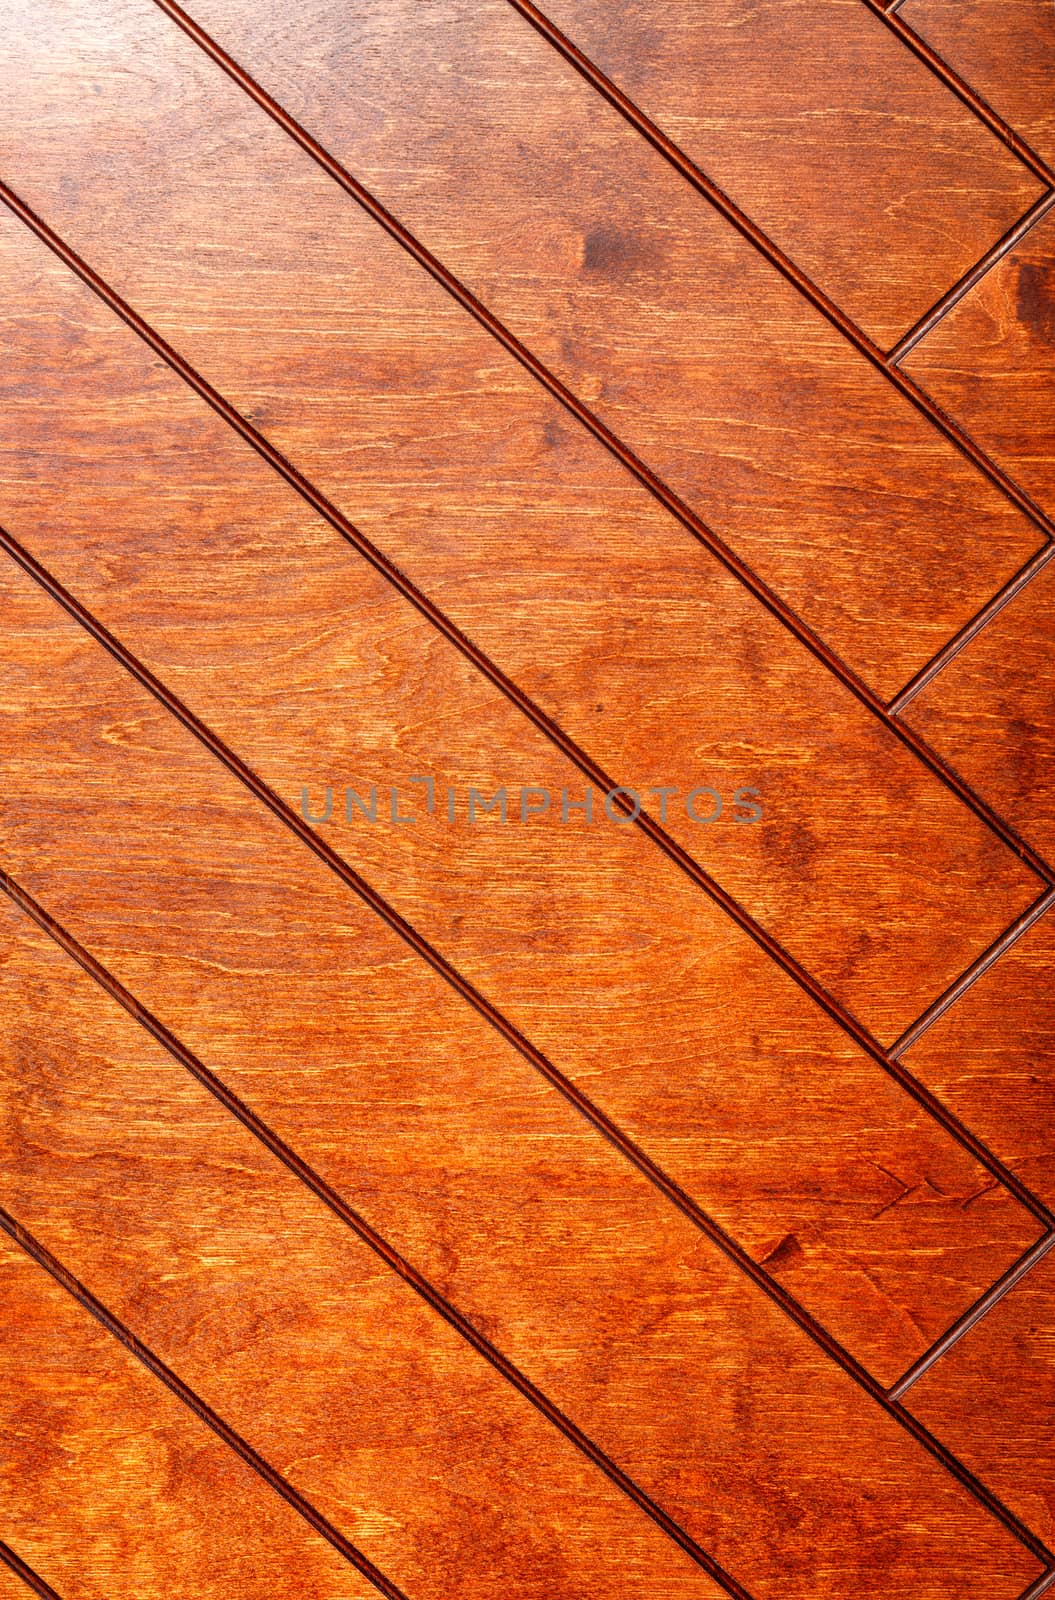 Rectangular boards are painted in orange and neatly laid out with a herringbone pattern, vertical image.